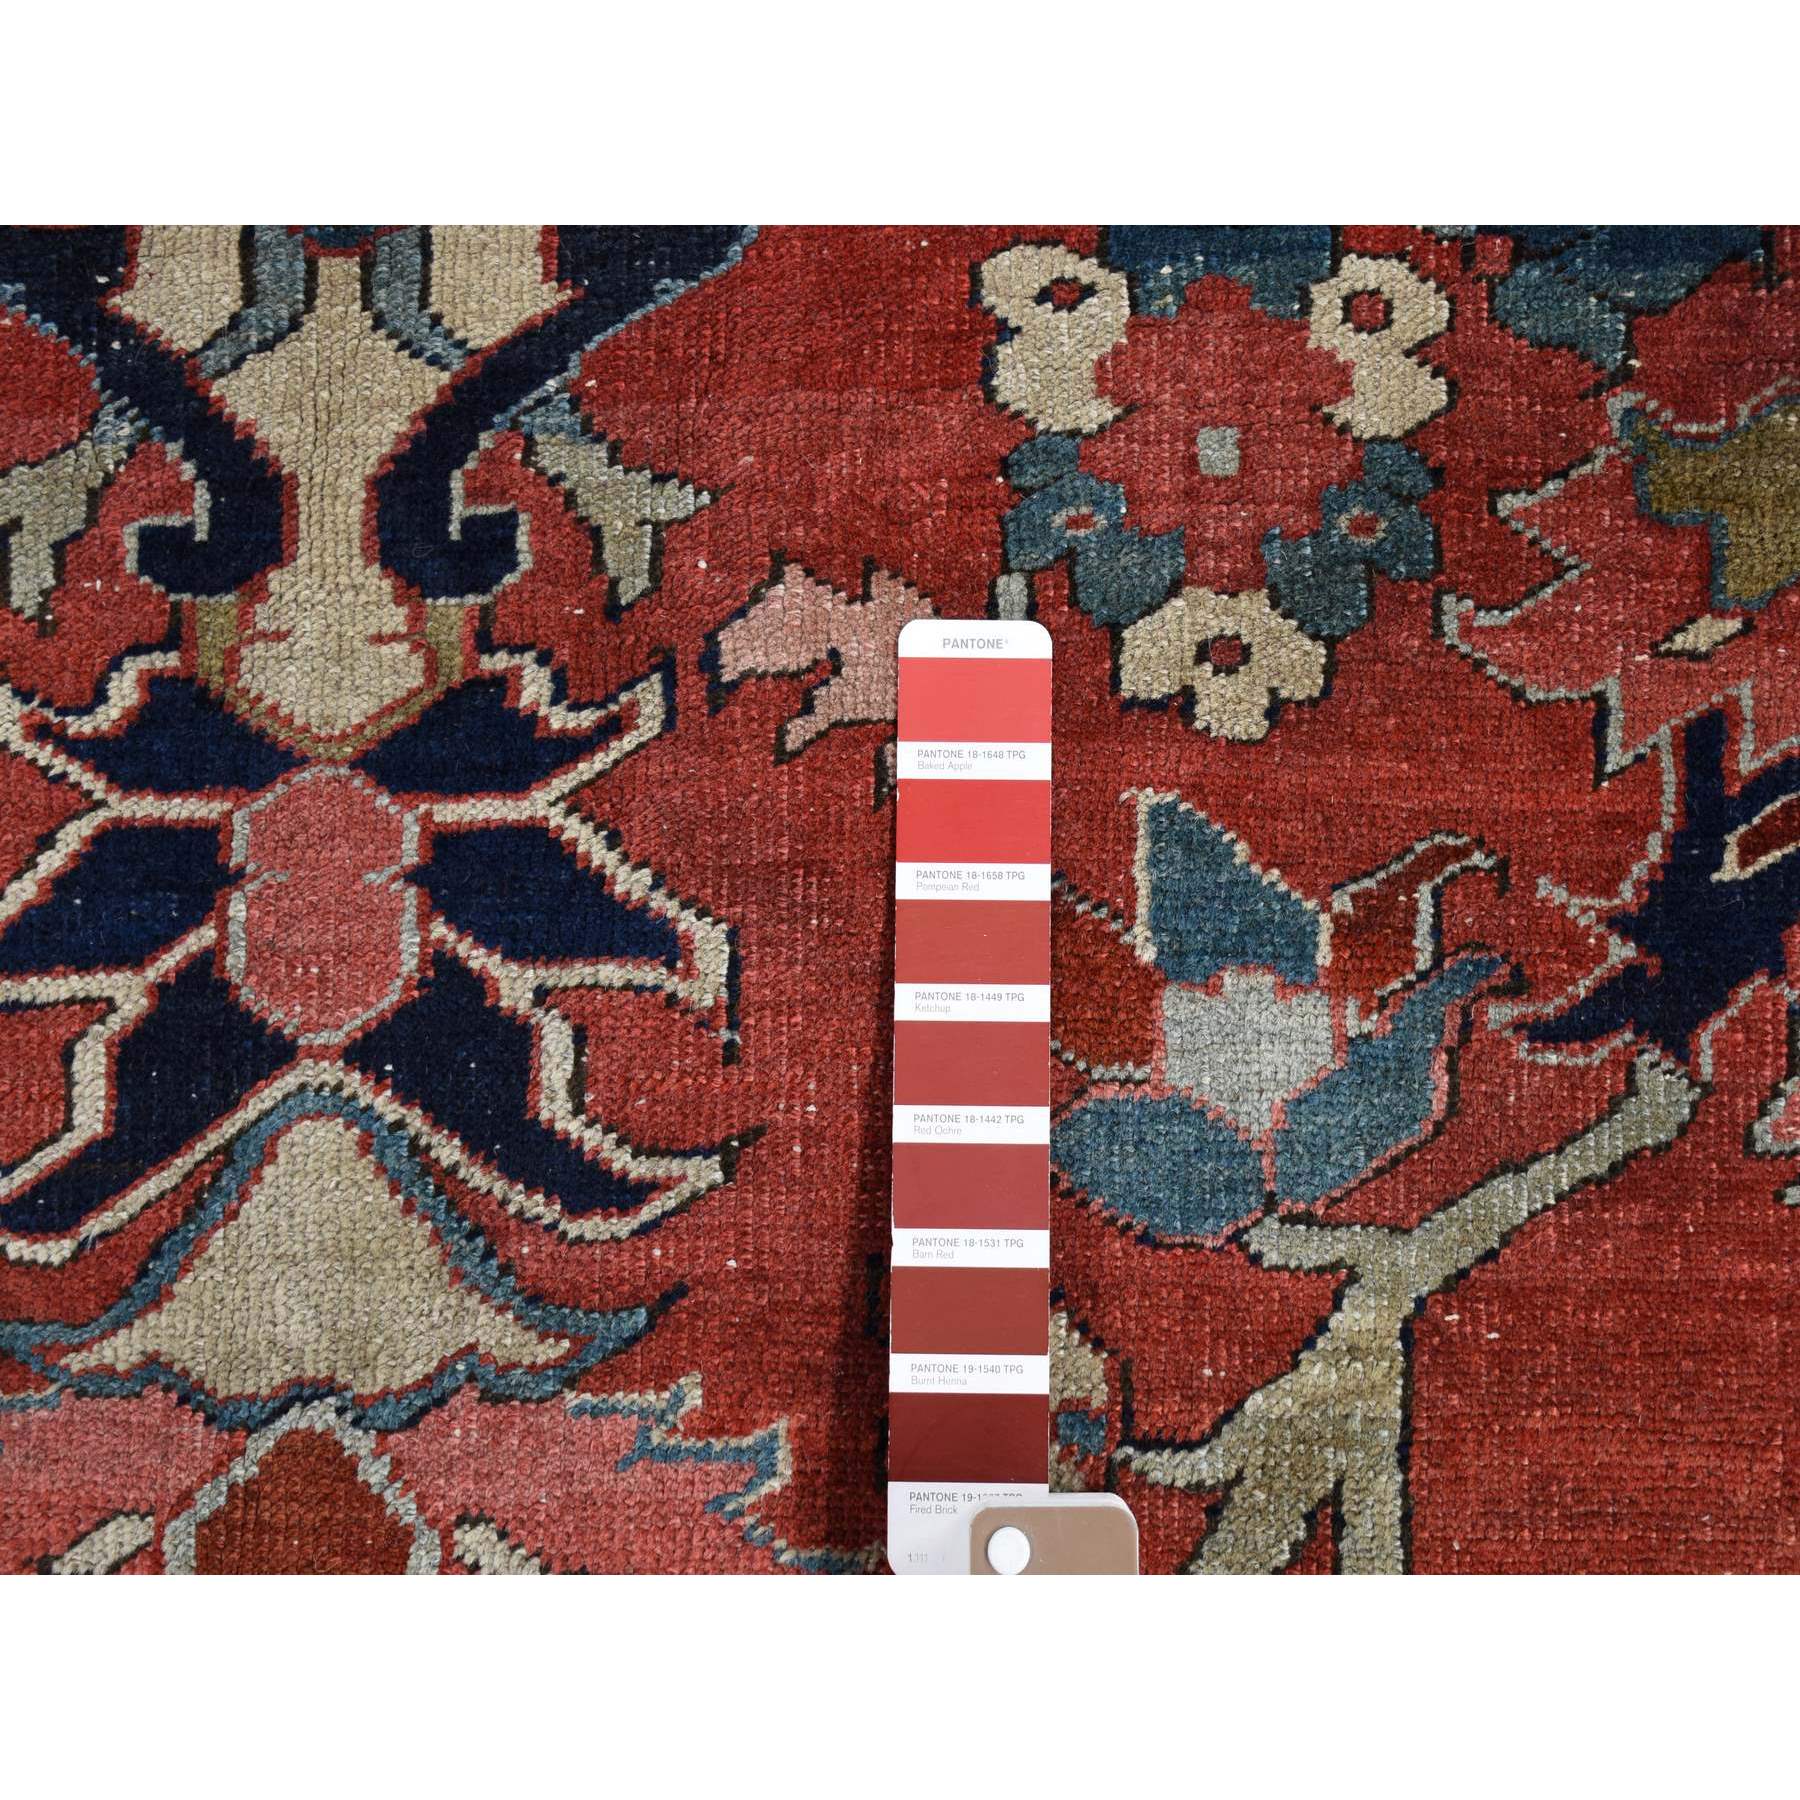 9'1"x13'1" Alabama Crimson, Antique Persian Serapi Heriz, Flower Medallion Design, Pure Wool, Sides and Ends Professionally Secured, Cleaned, Hand Woven, Oriental Rug 